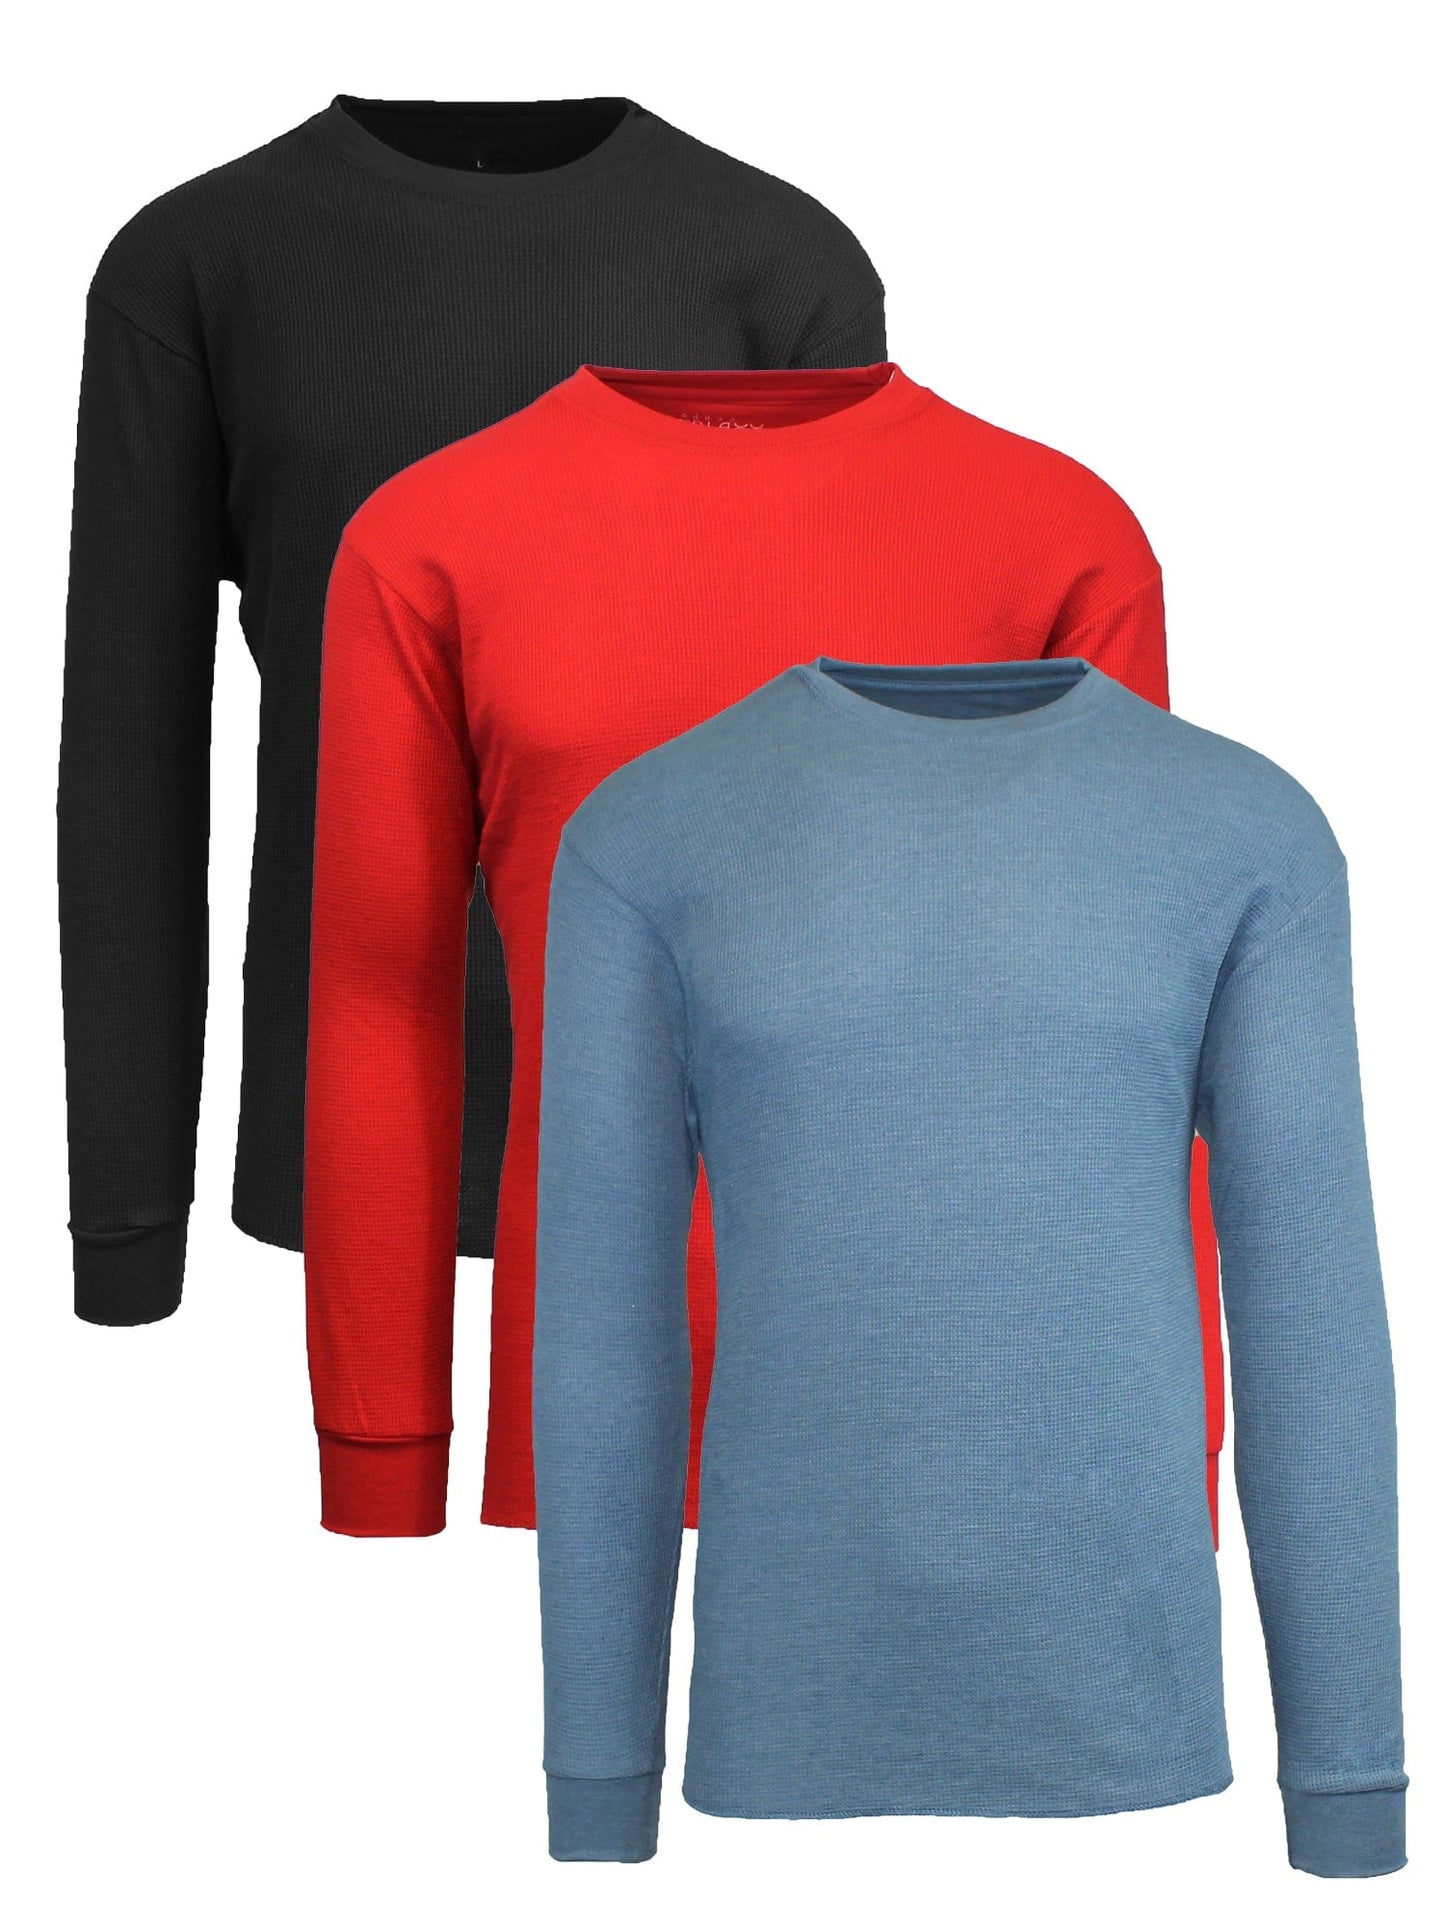 Men's Long Sleeve Thermal Shirts (3-Pack) – GalaxybyHarvic